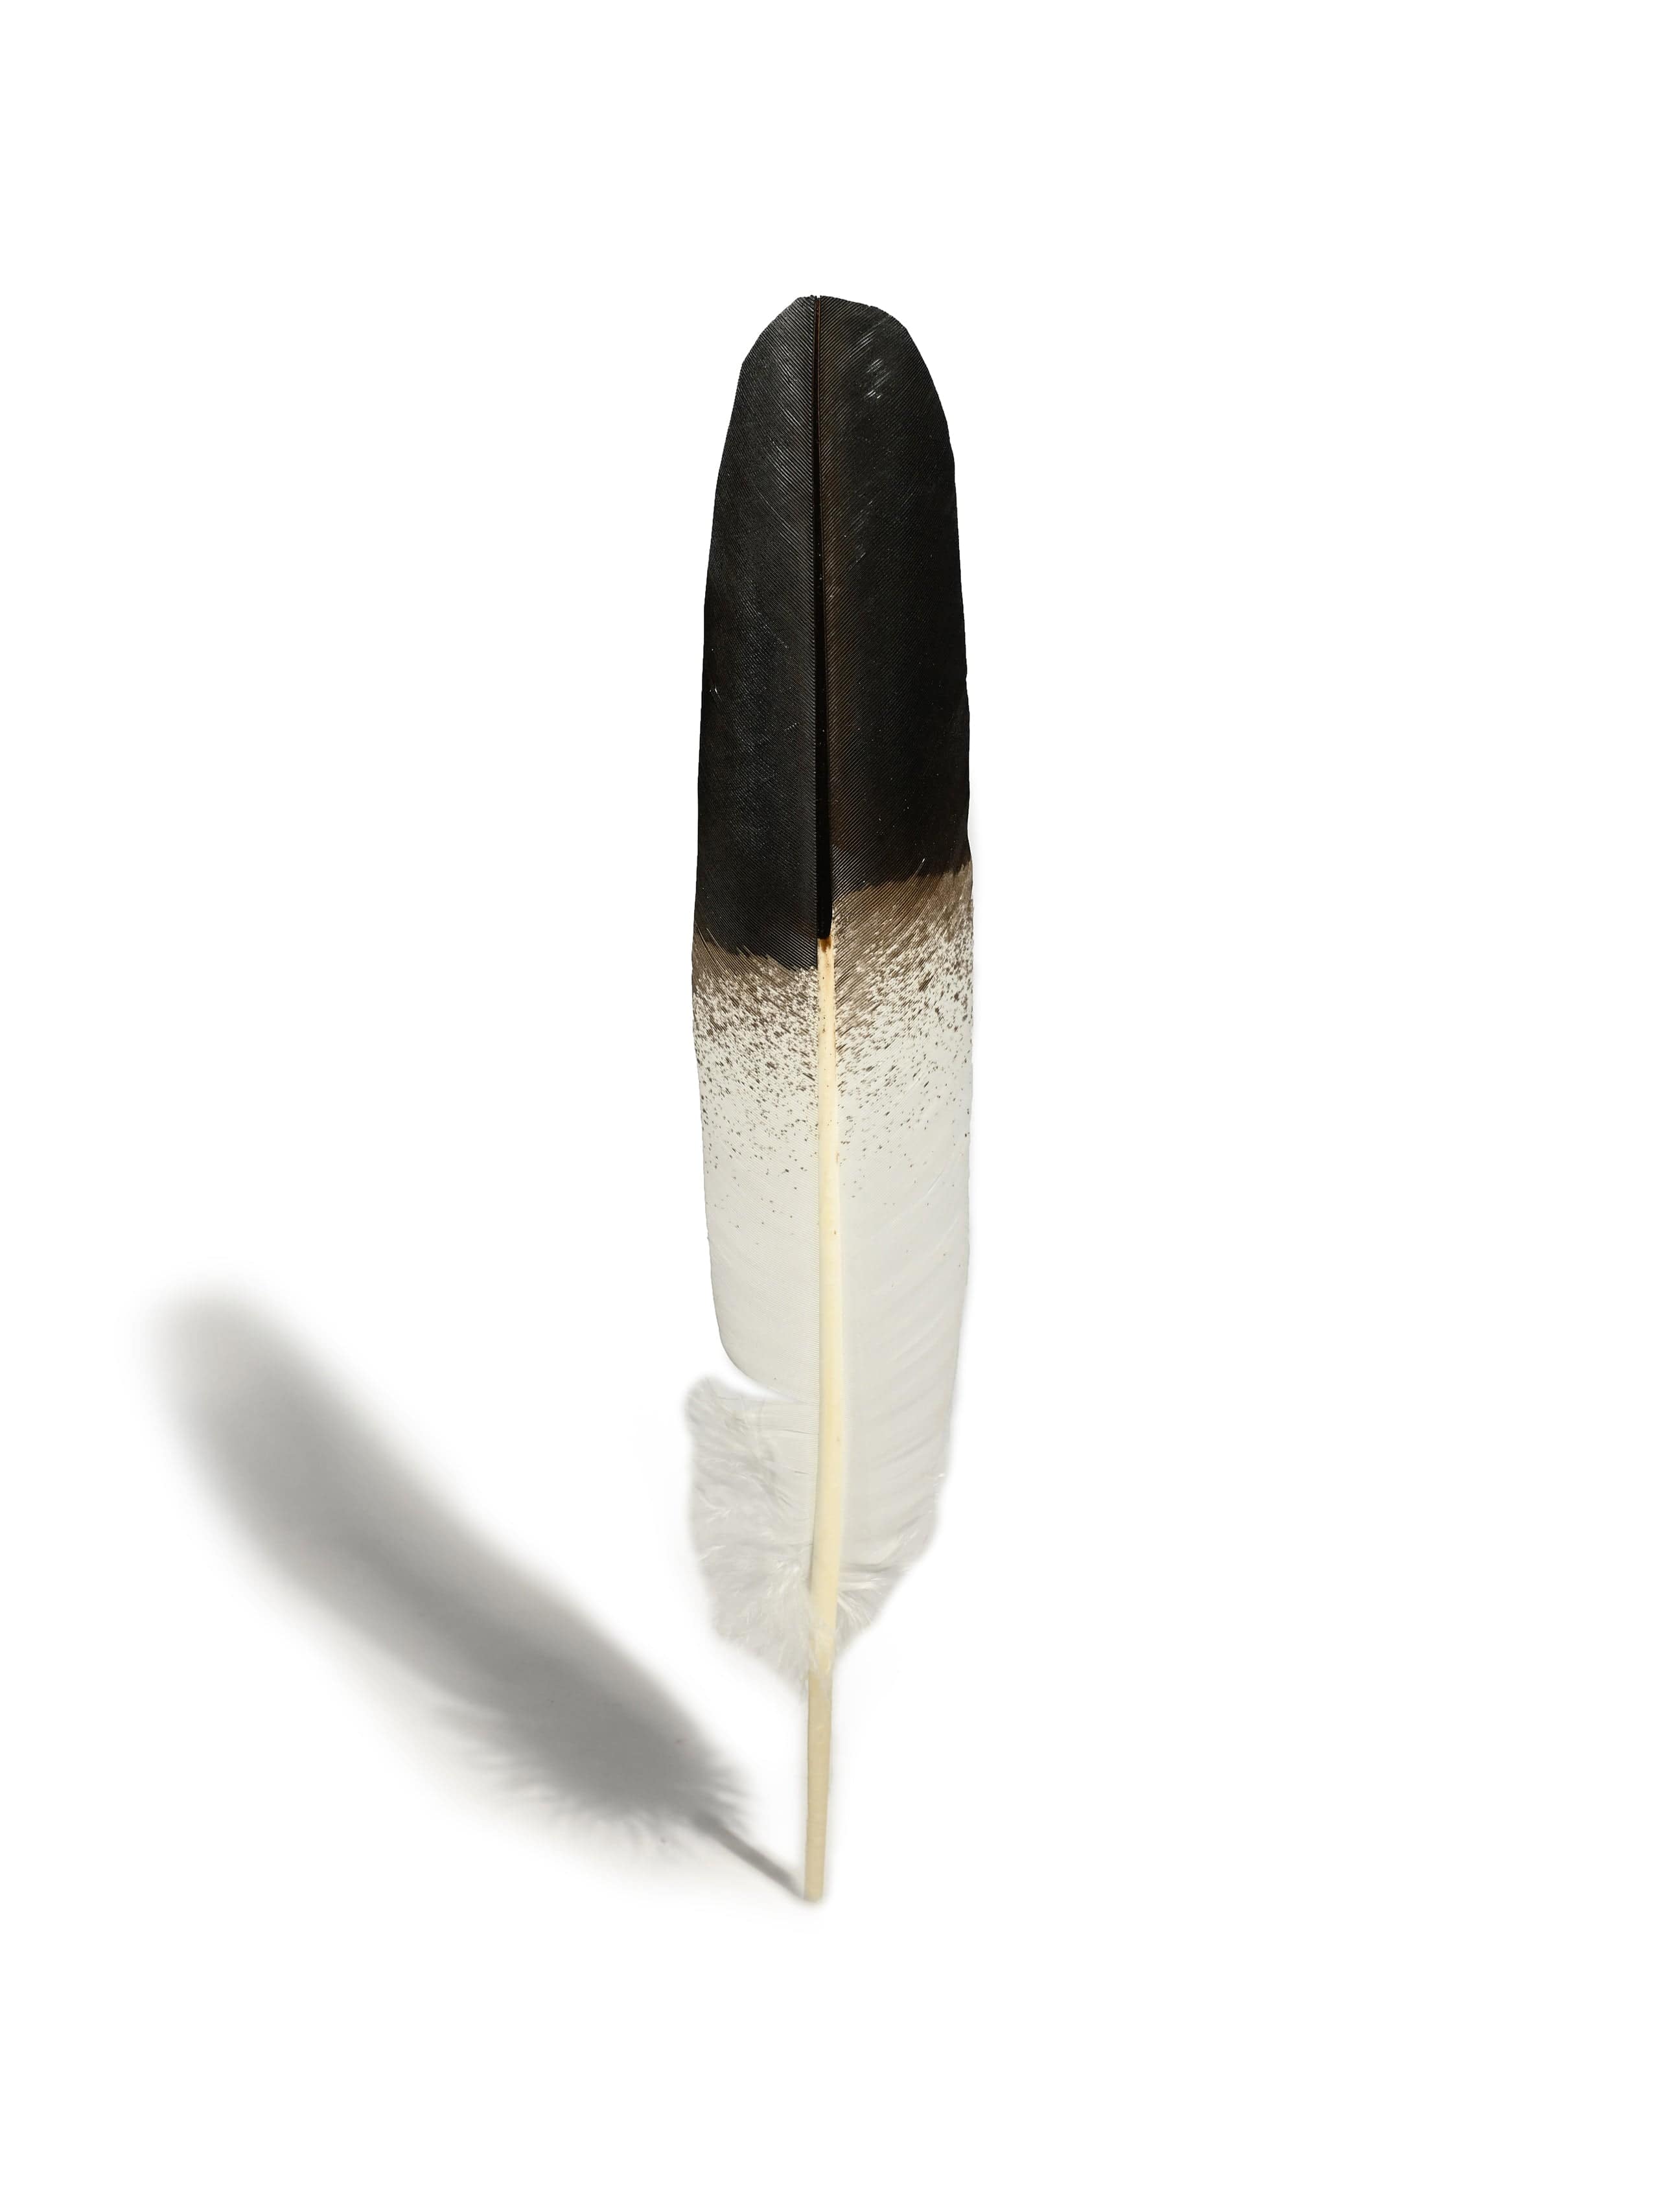 Large Natural Eagle Feather, Carnival Decoration, Black Feather